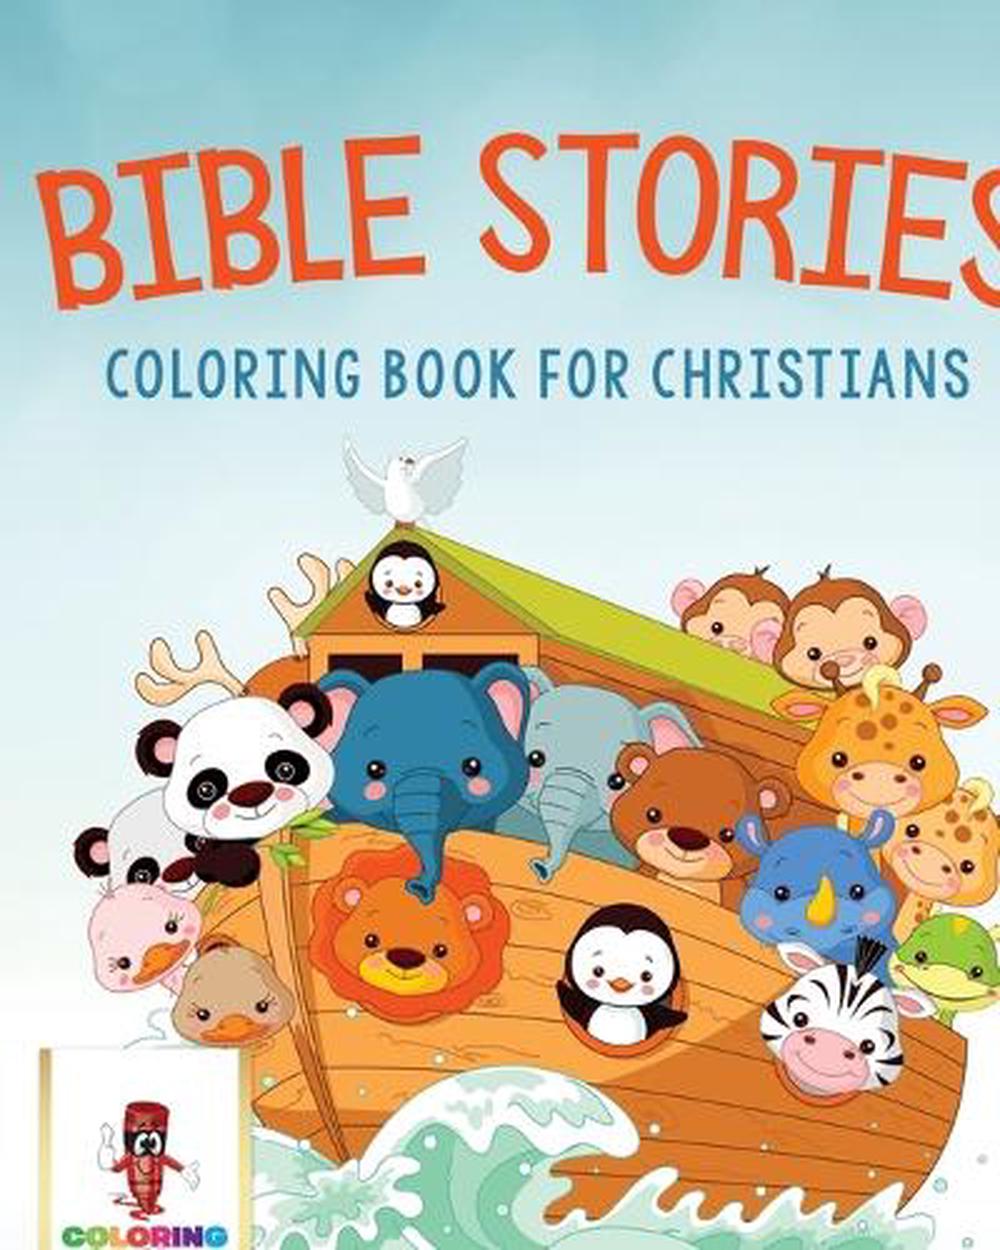 Bible Stories: Coloring Book for Christians by Coloring Bandit ...